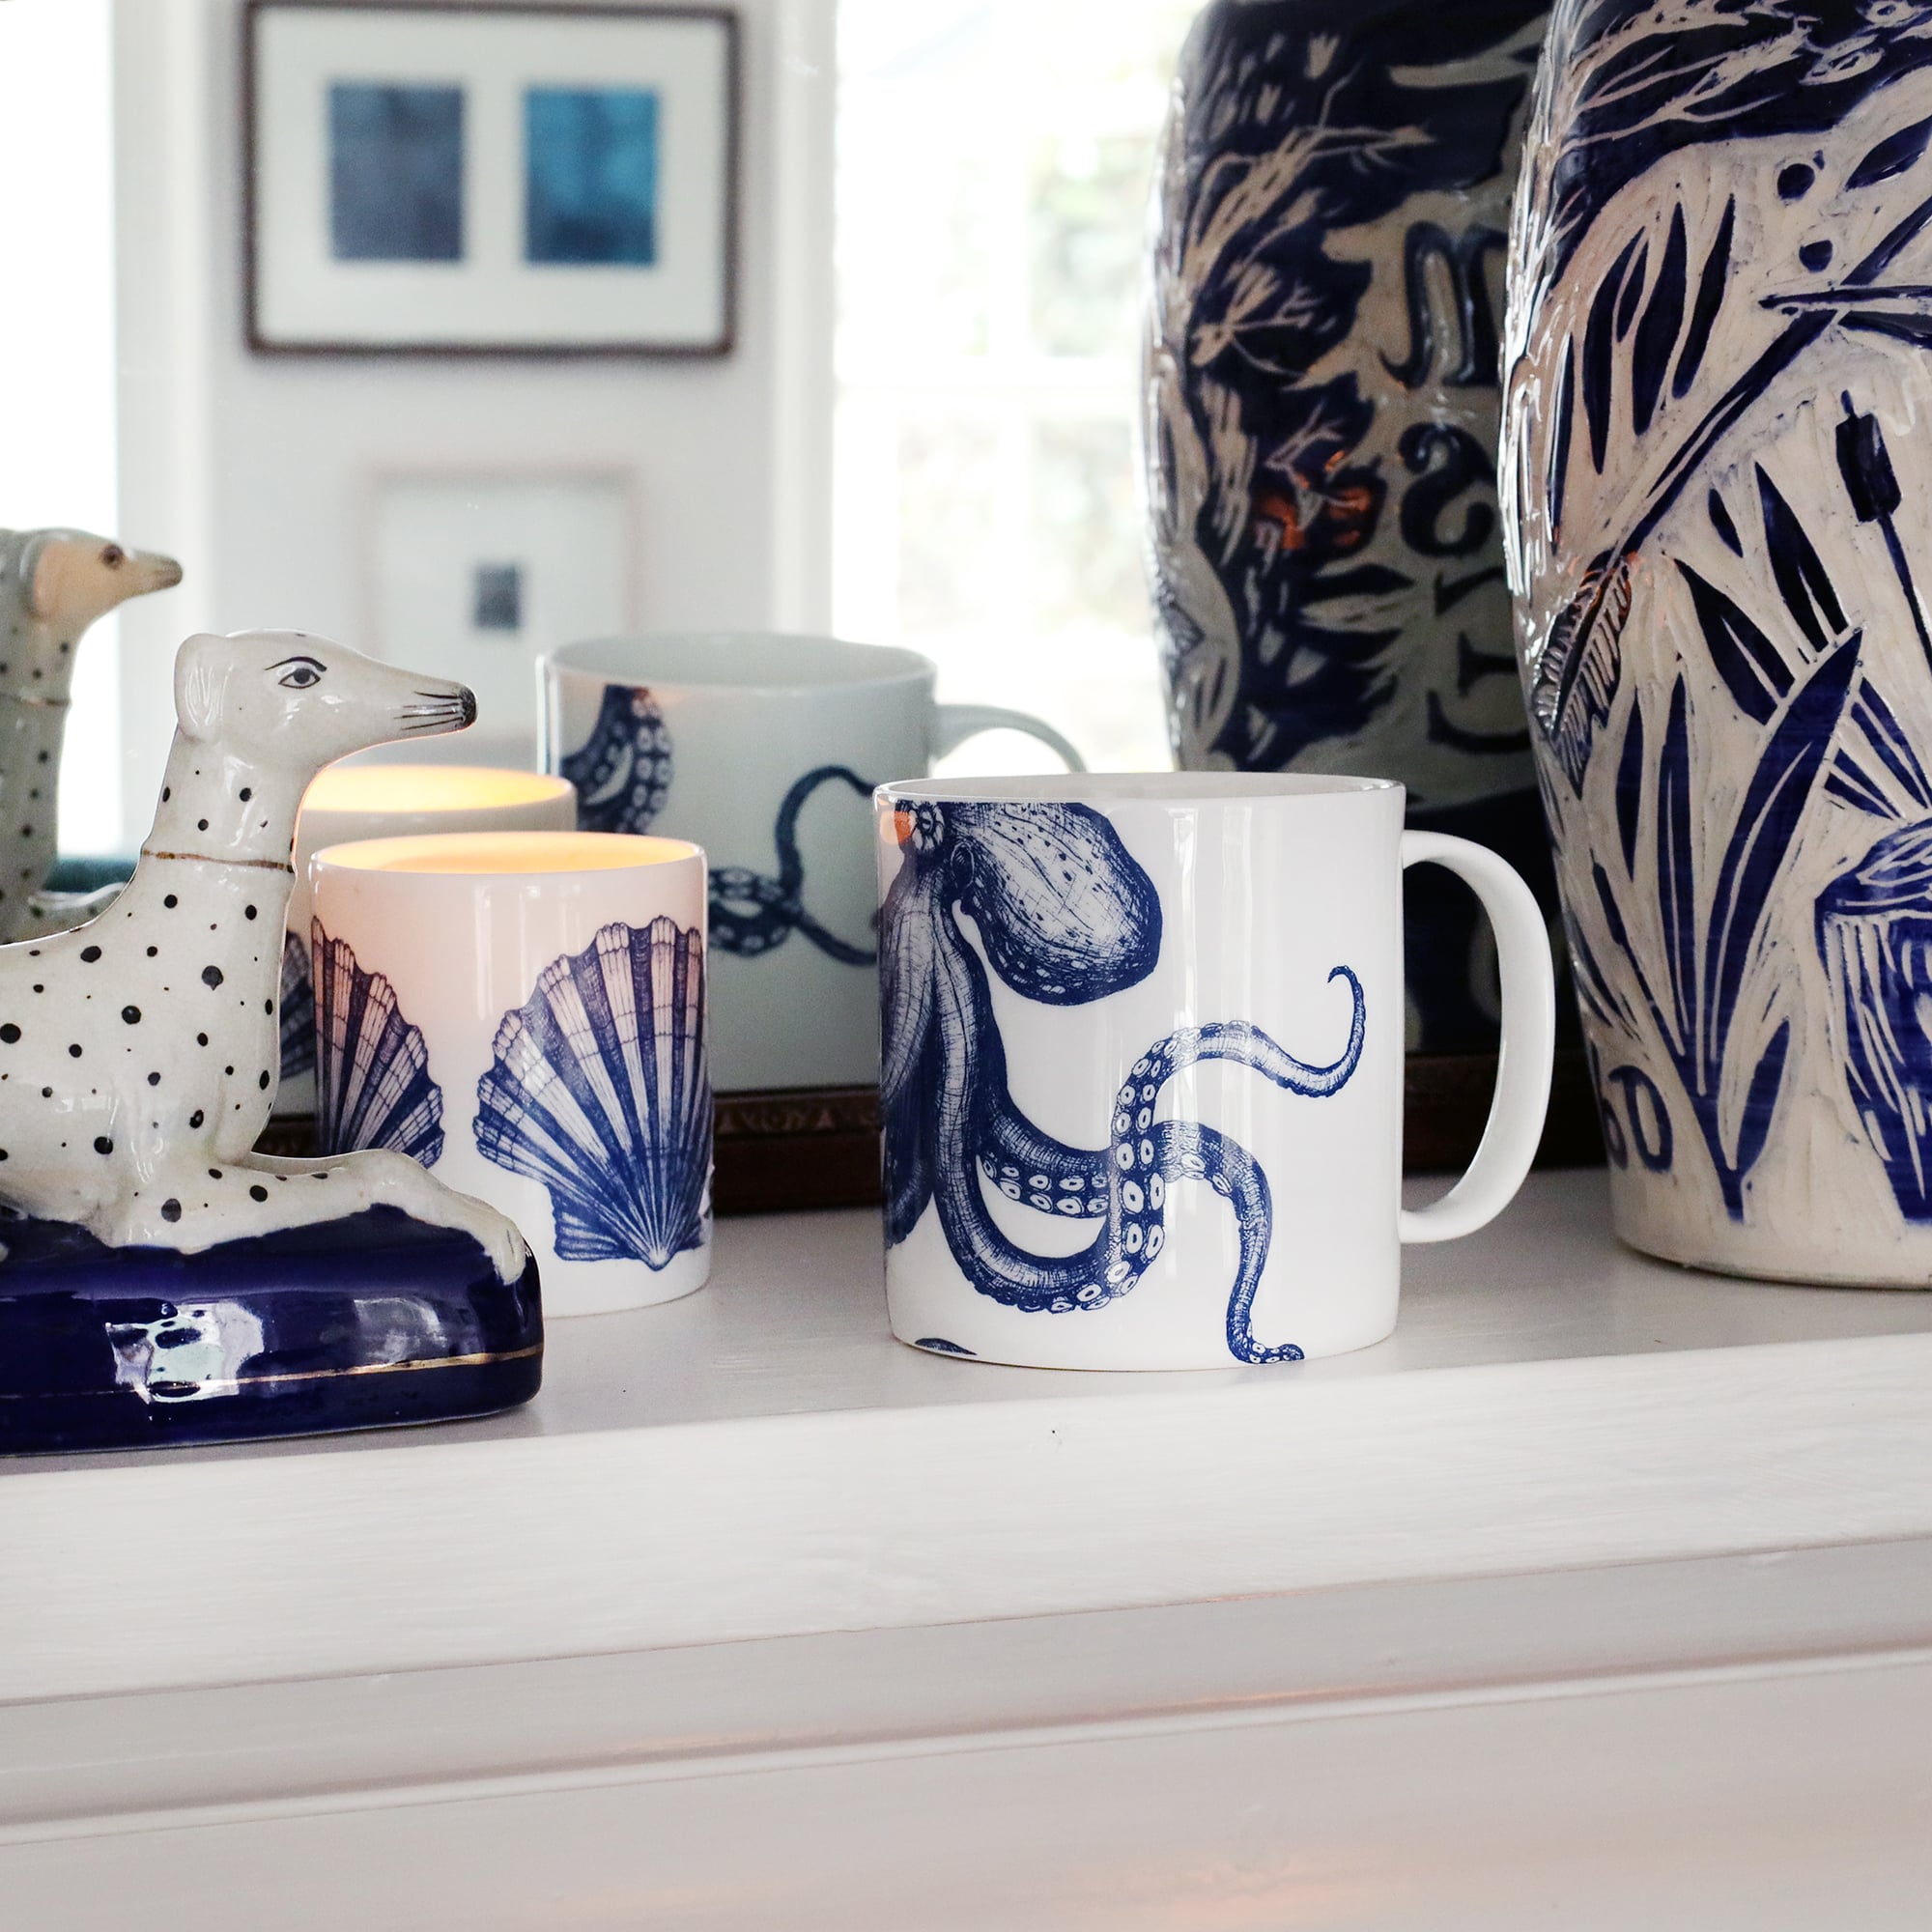 White bone china mug with a navy illustrated octopus on, sitting on a mantlepiece with other blue and white items and reflected in a mirror behind.